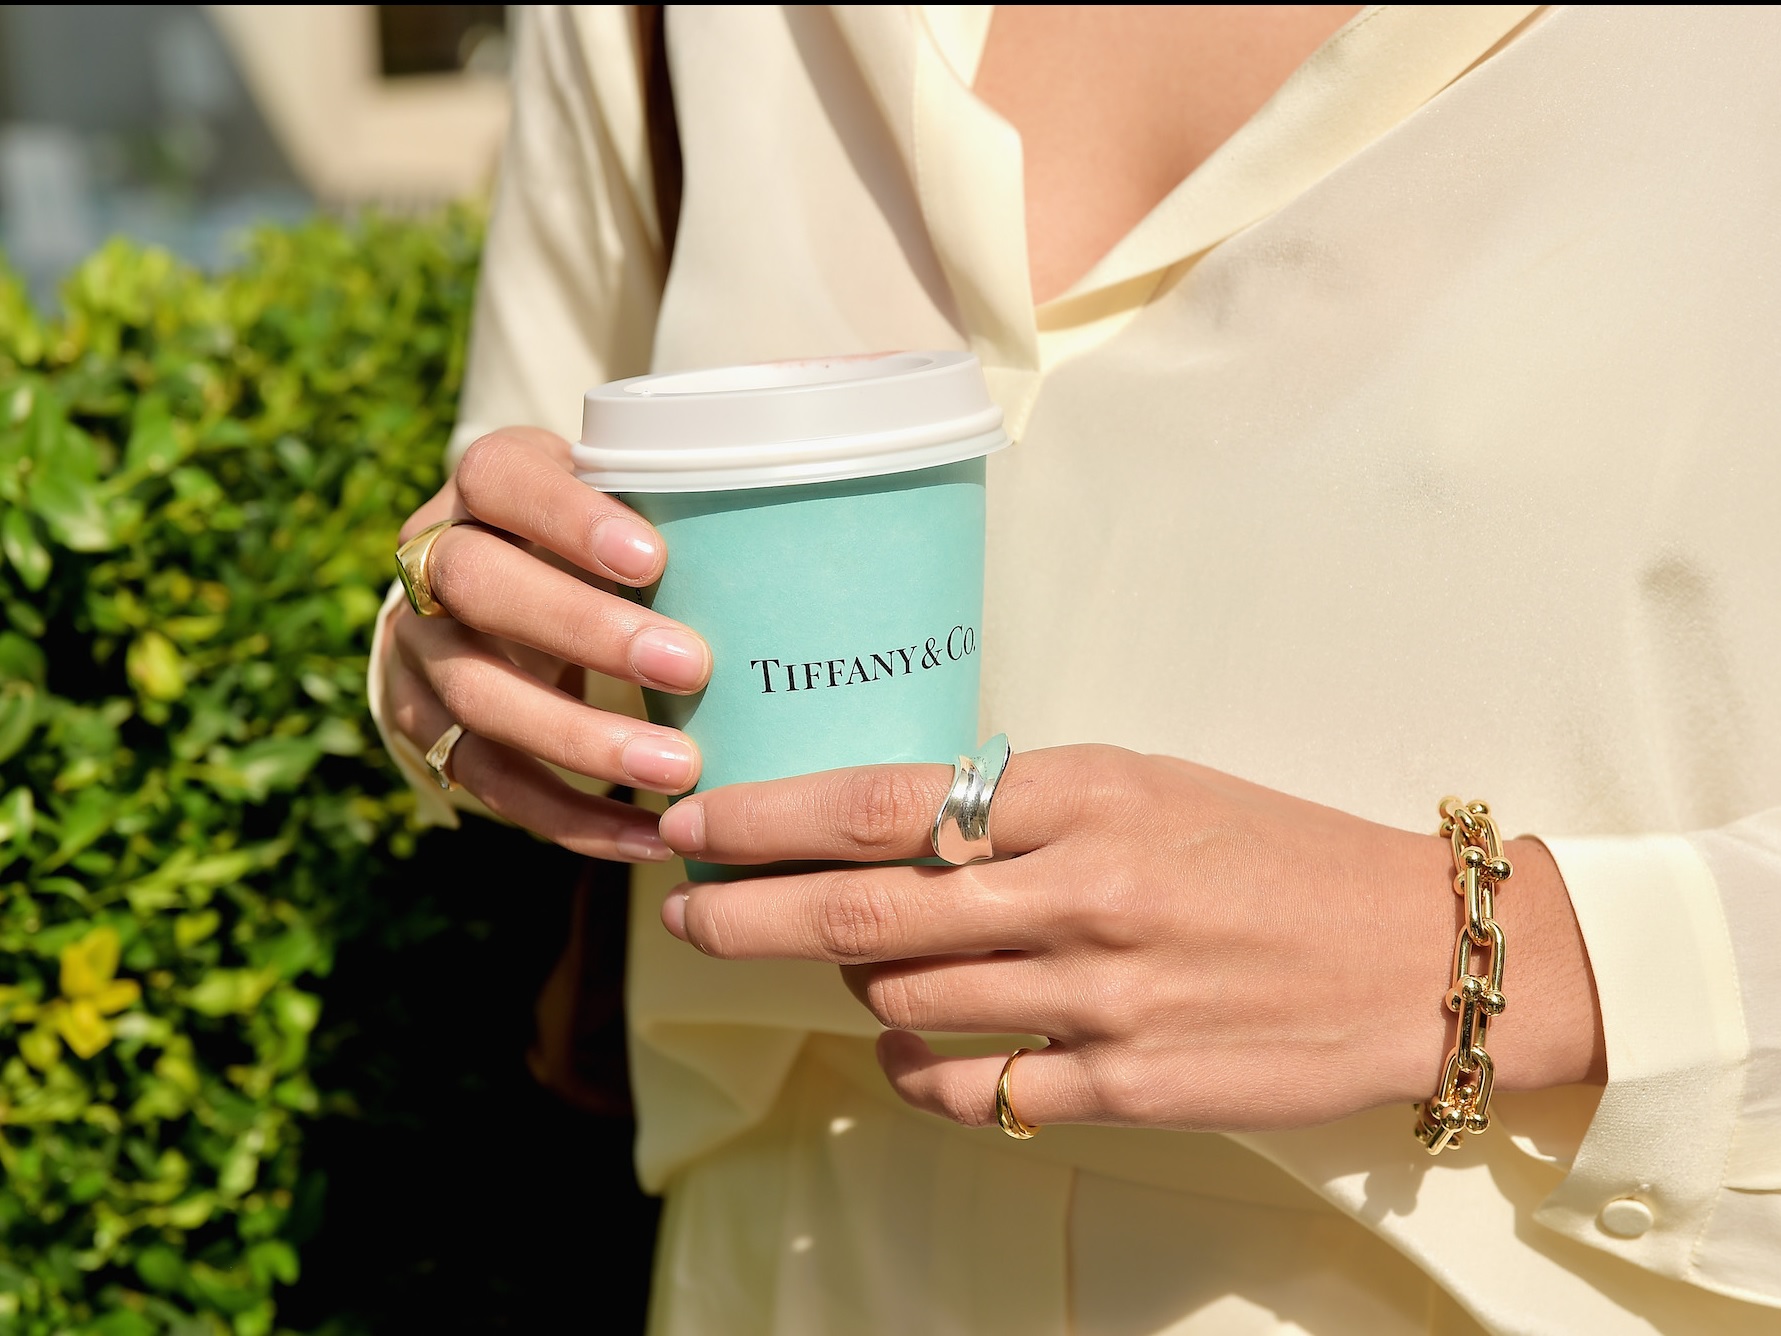 17 surprising things you never knew about Tiffany & Co. – SheKnows